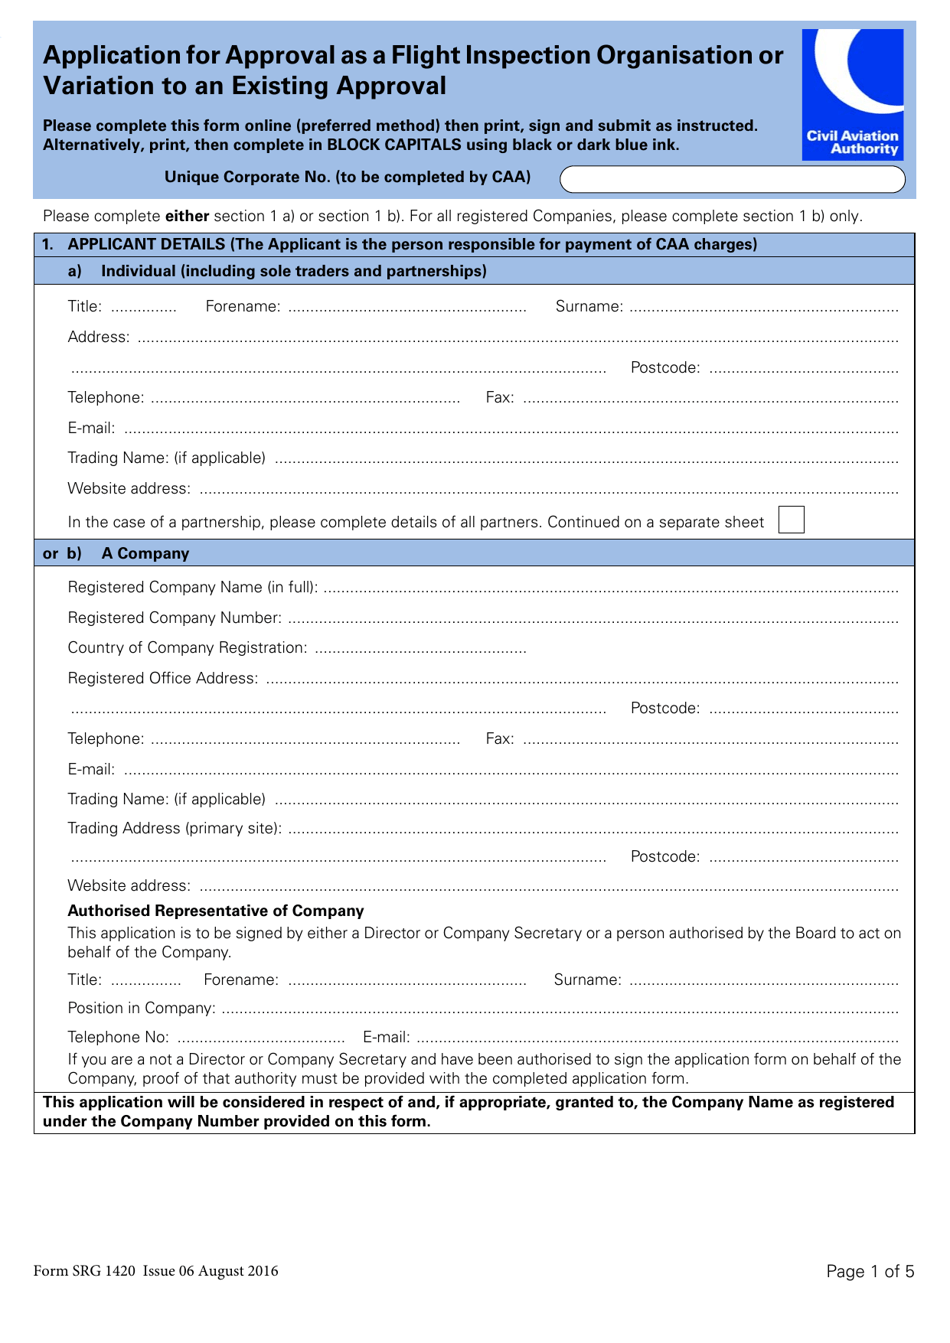 Form SRG1420 Application for Approval as a Flight Inspection Organisation or Variation to an Existing Approval - United Kingdom, Page 1